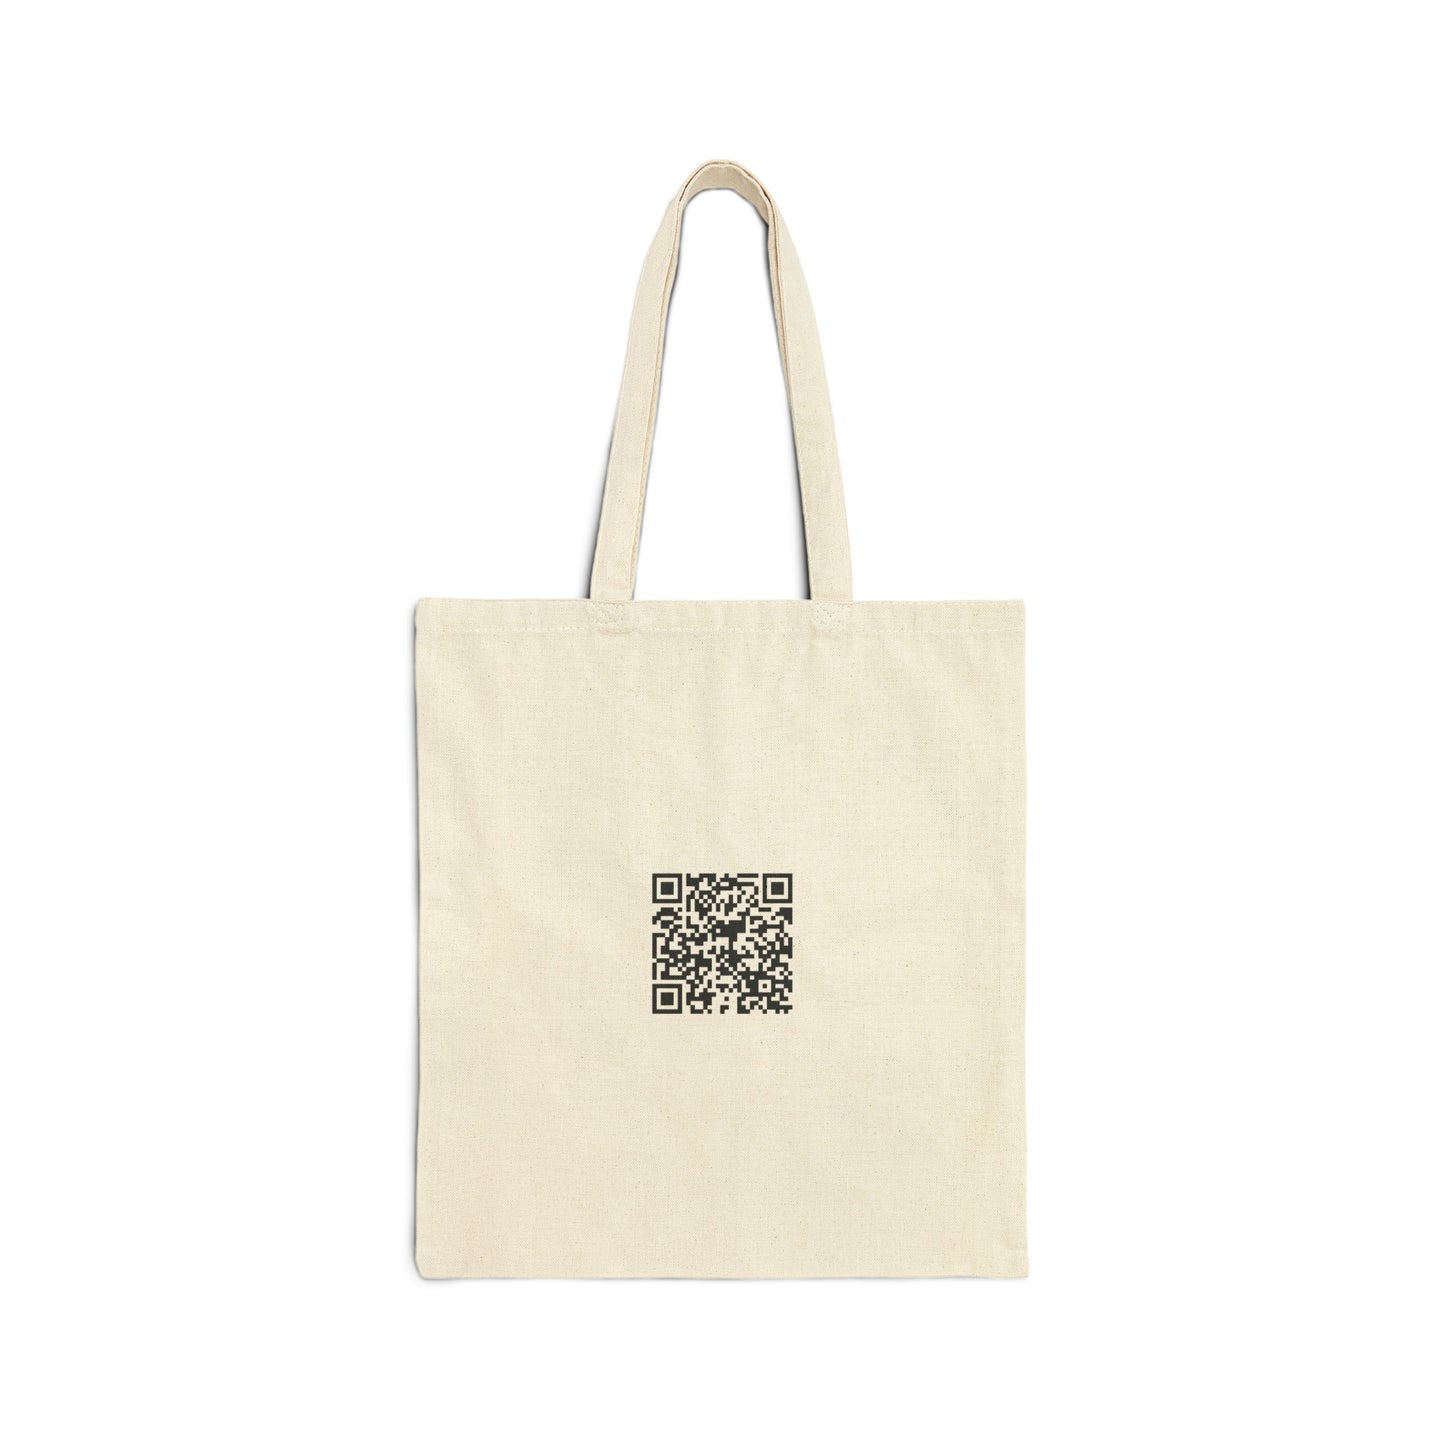 Overland To Cairo By Any Means - Cotton Canvas Tote Bag